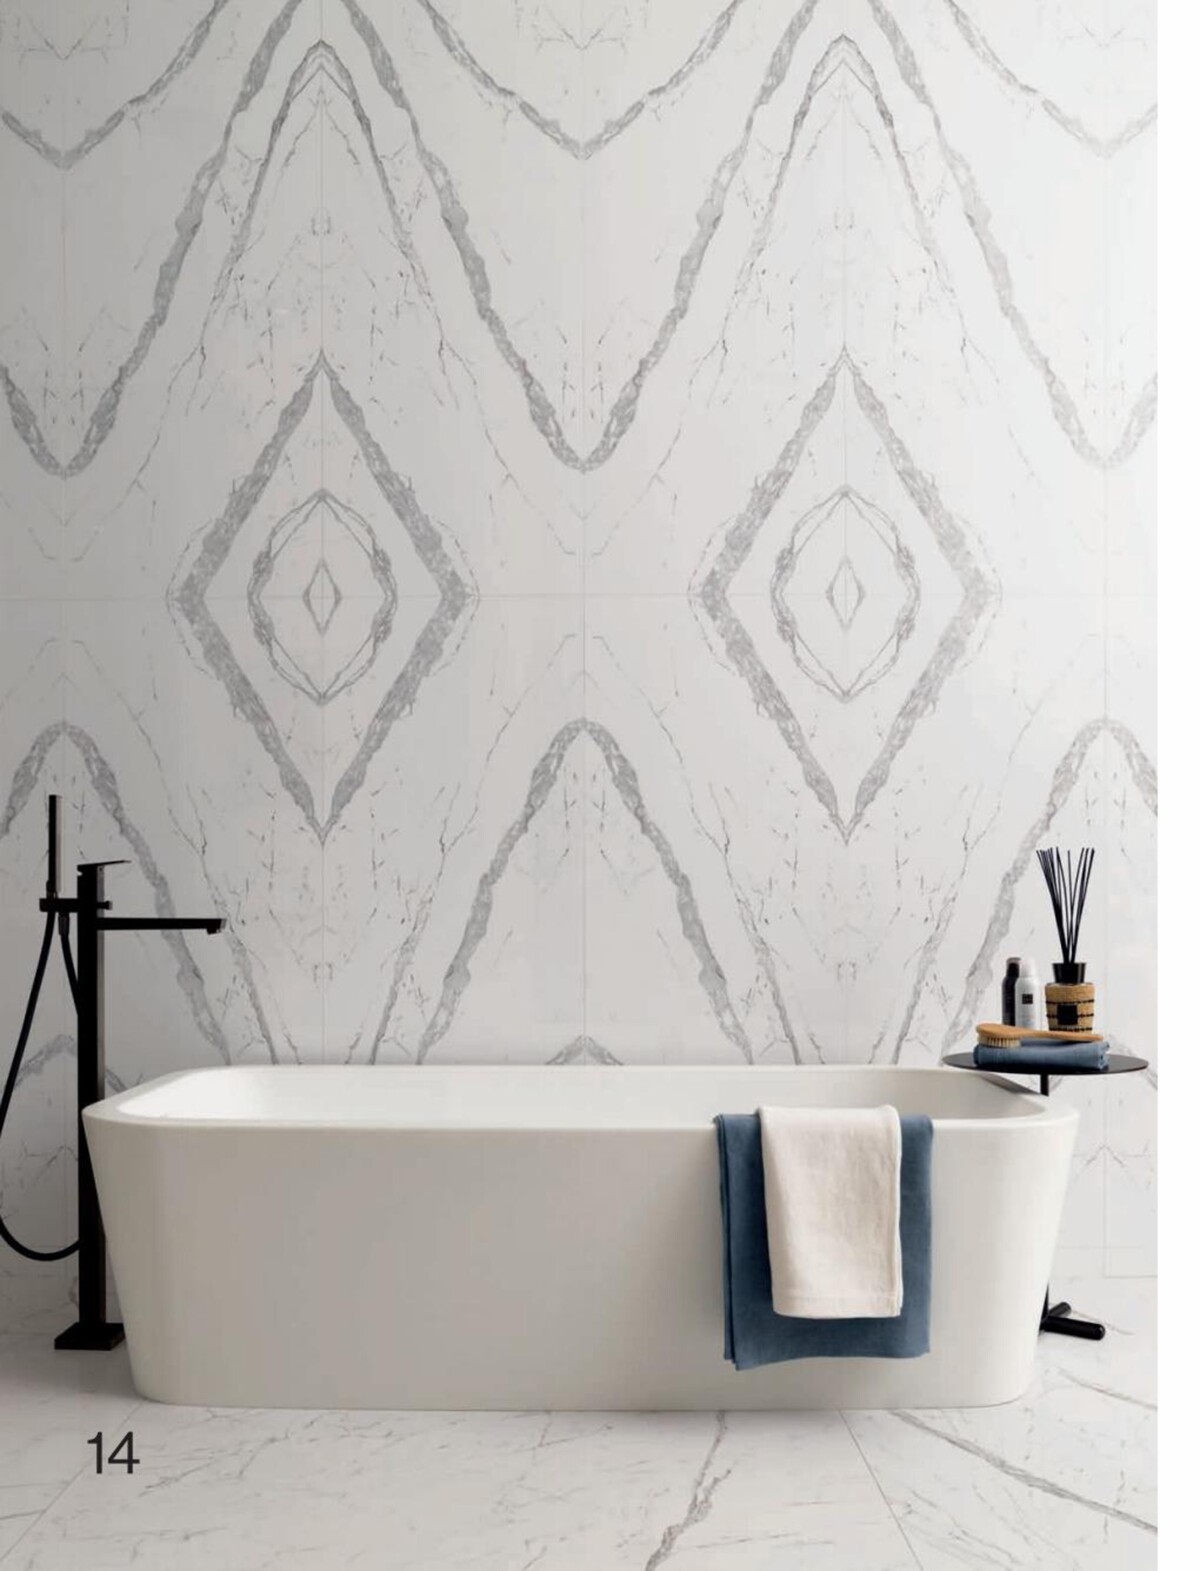 Catalogue MARMI,a ceramic tile that echoes the purity of marble, page 00014